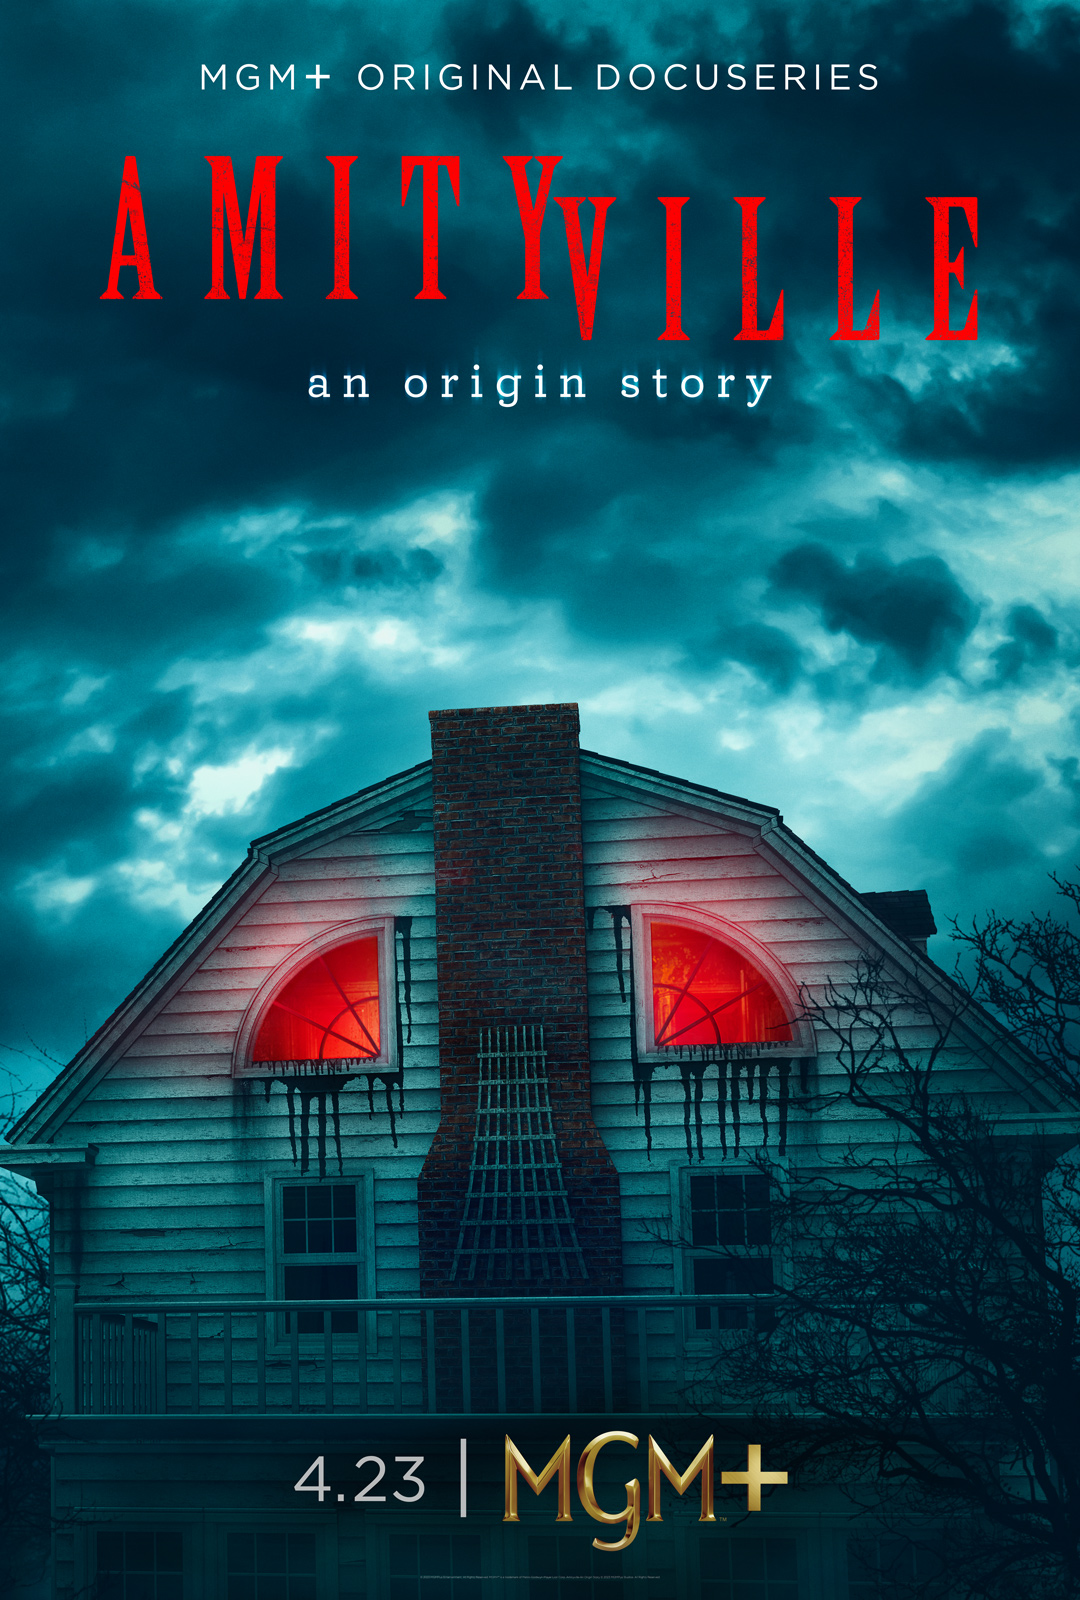 MGM_Amityville_Vertical_1080x1620_V2